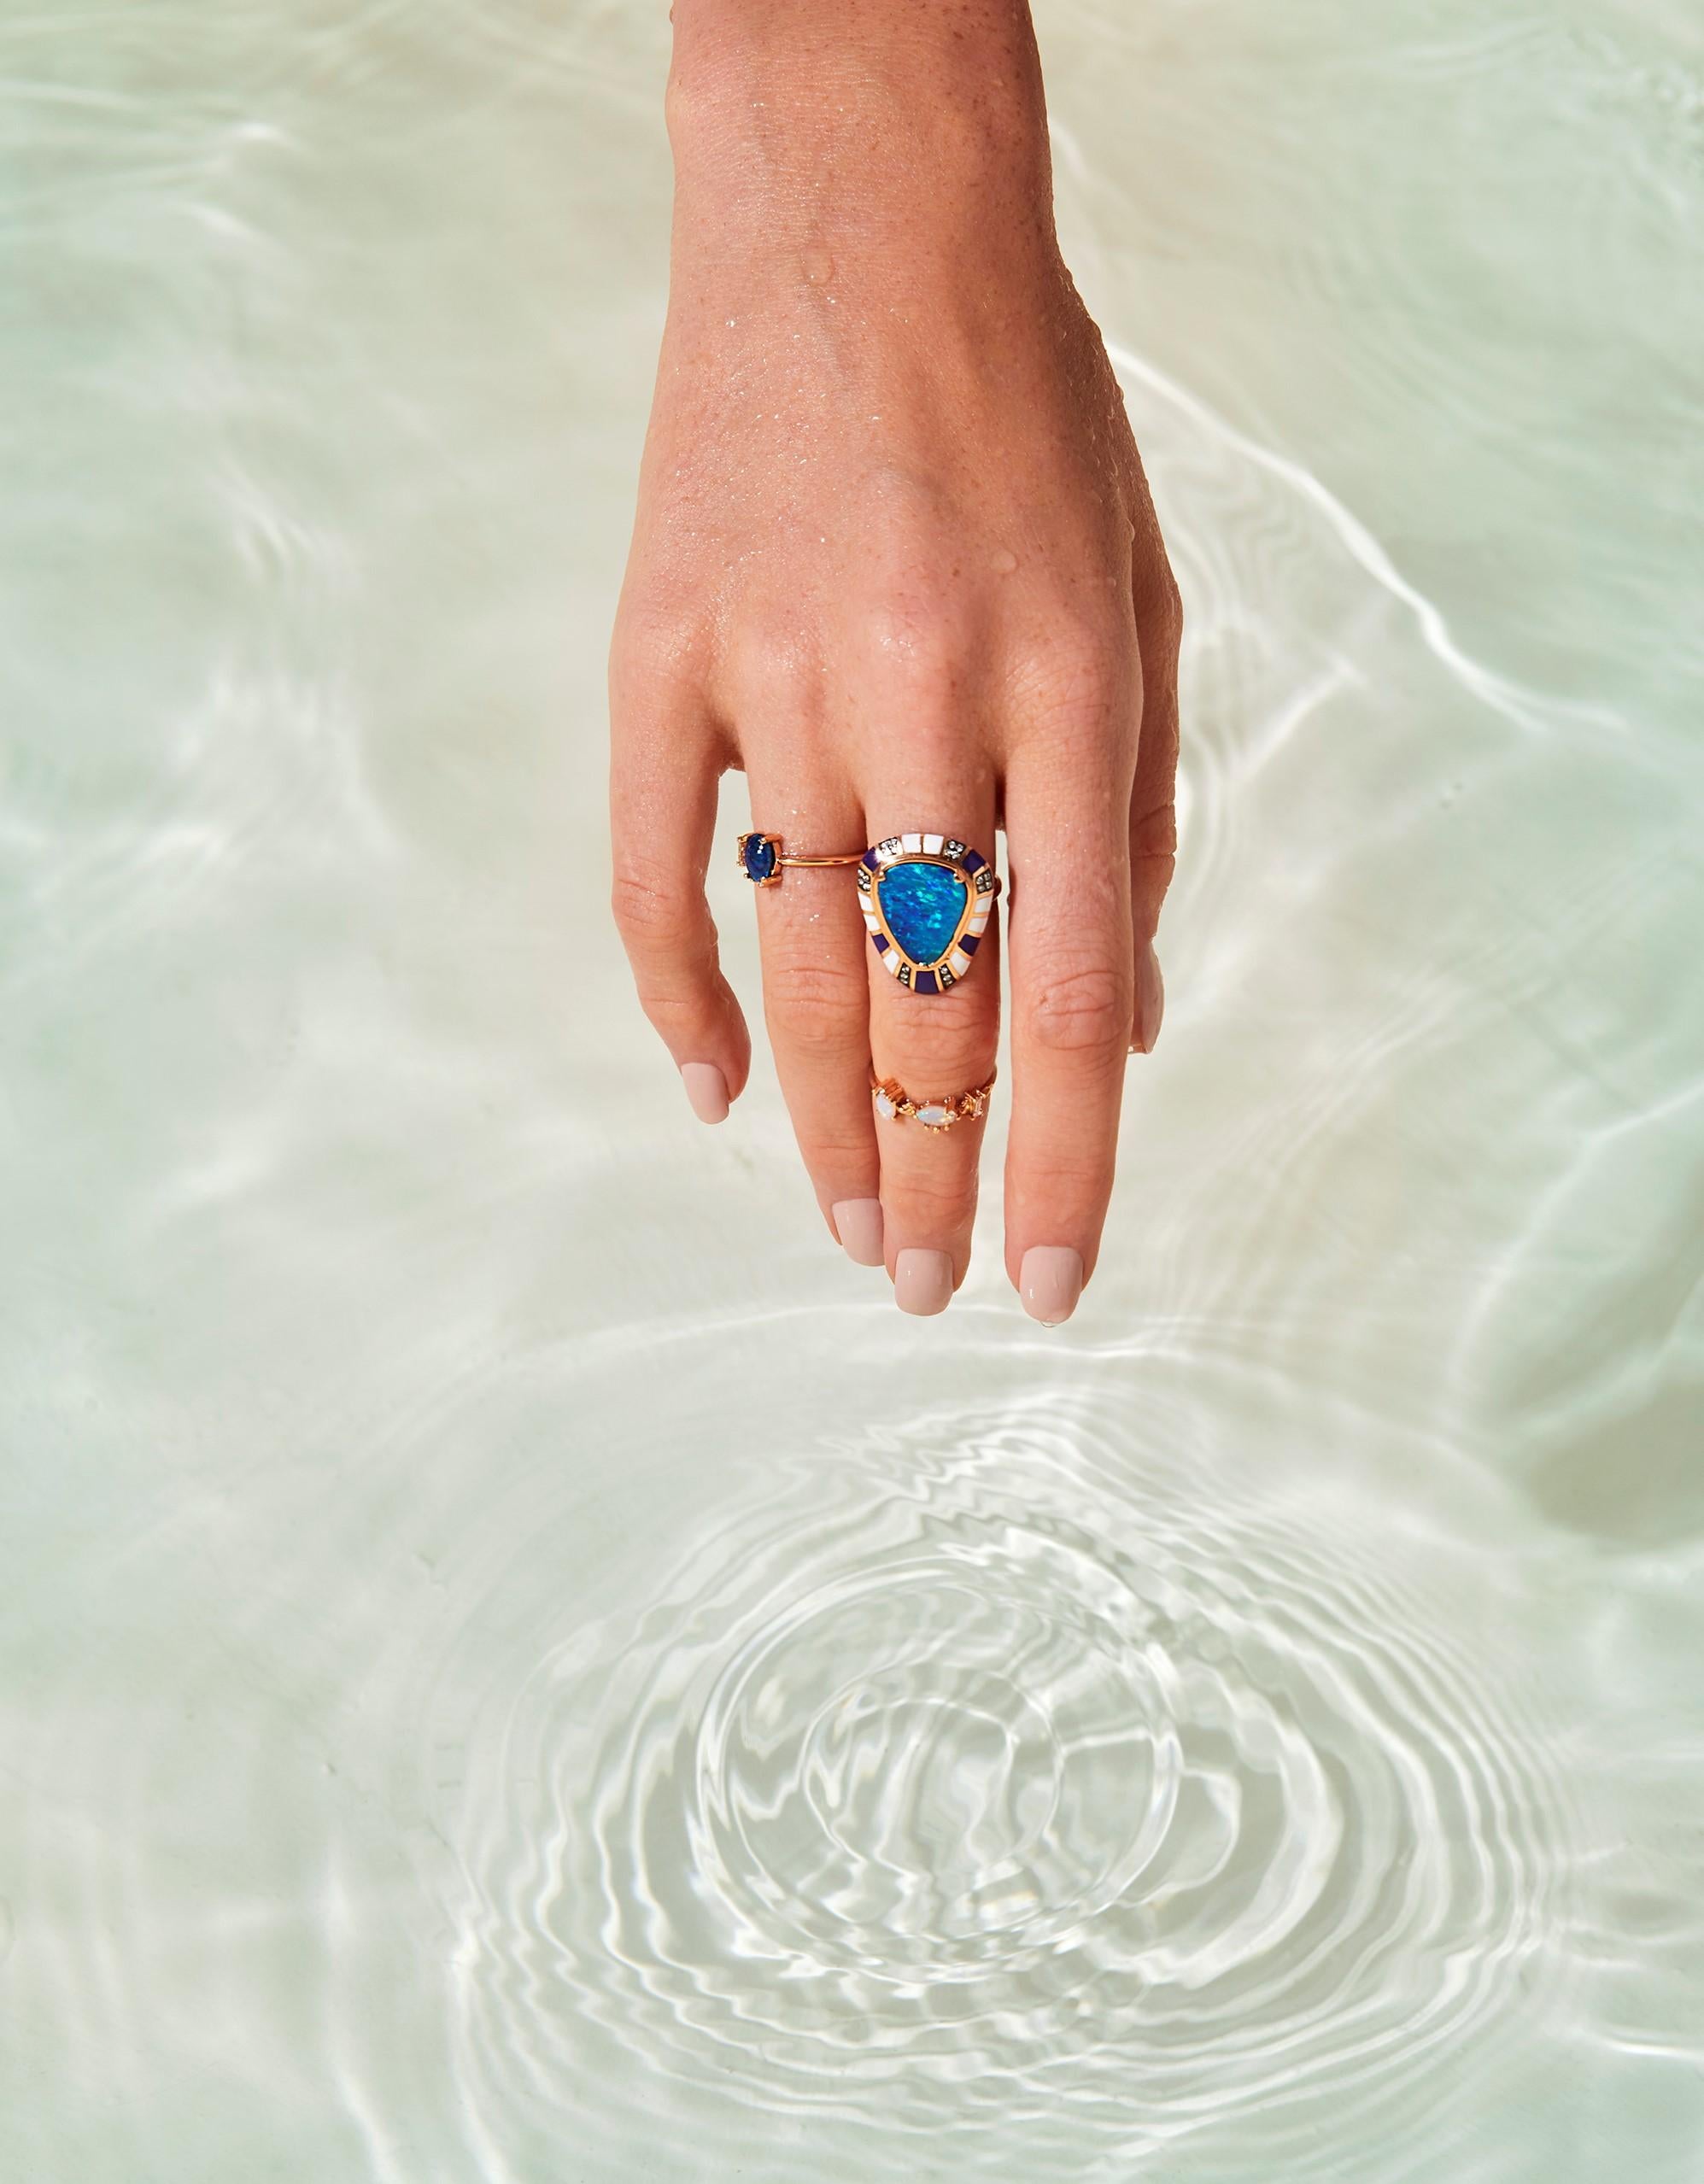 The Treasures of The Sea Collection is inspired by the water element which represents the treasures and natural stones hidden in the depths of the sea.
Cacia ring in 14k Rose gold in white and baguette diamond by Selda Jewellery

Additional